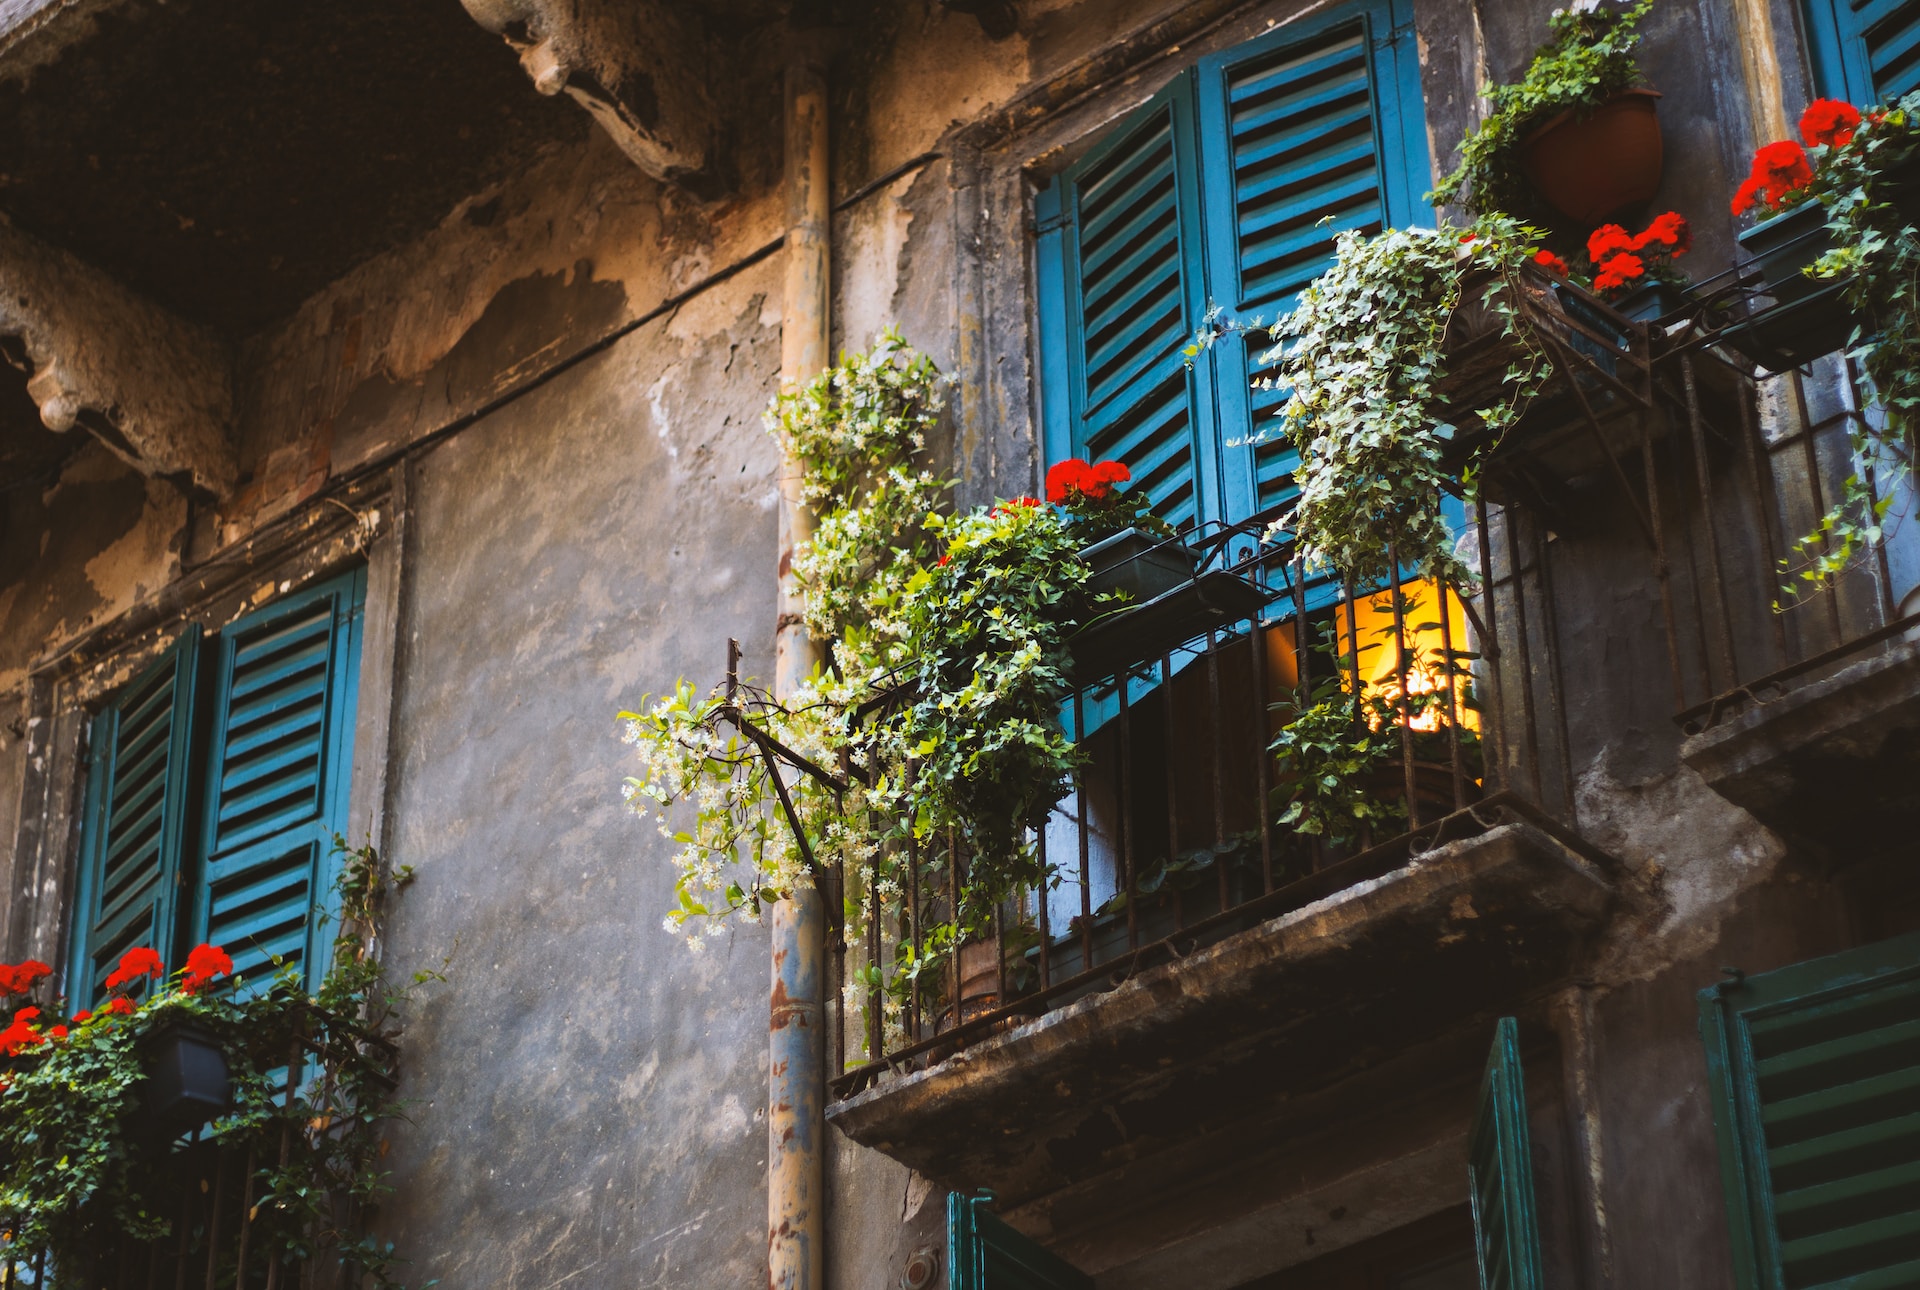 Juliet's Balcony is one of the most iconic love monuments from one of the most famous love stories ever.